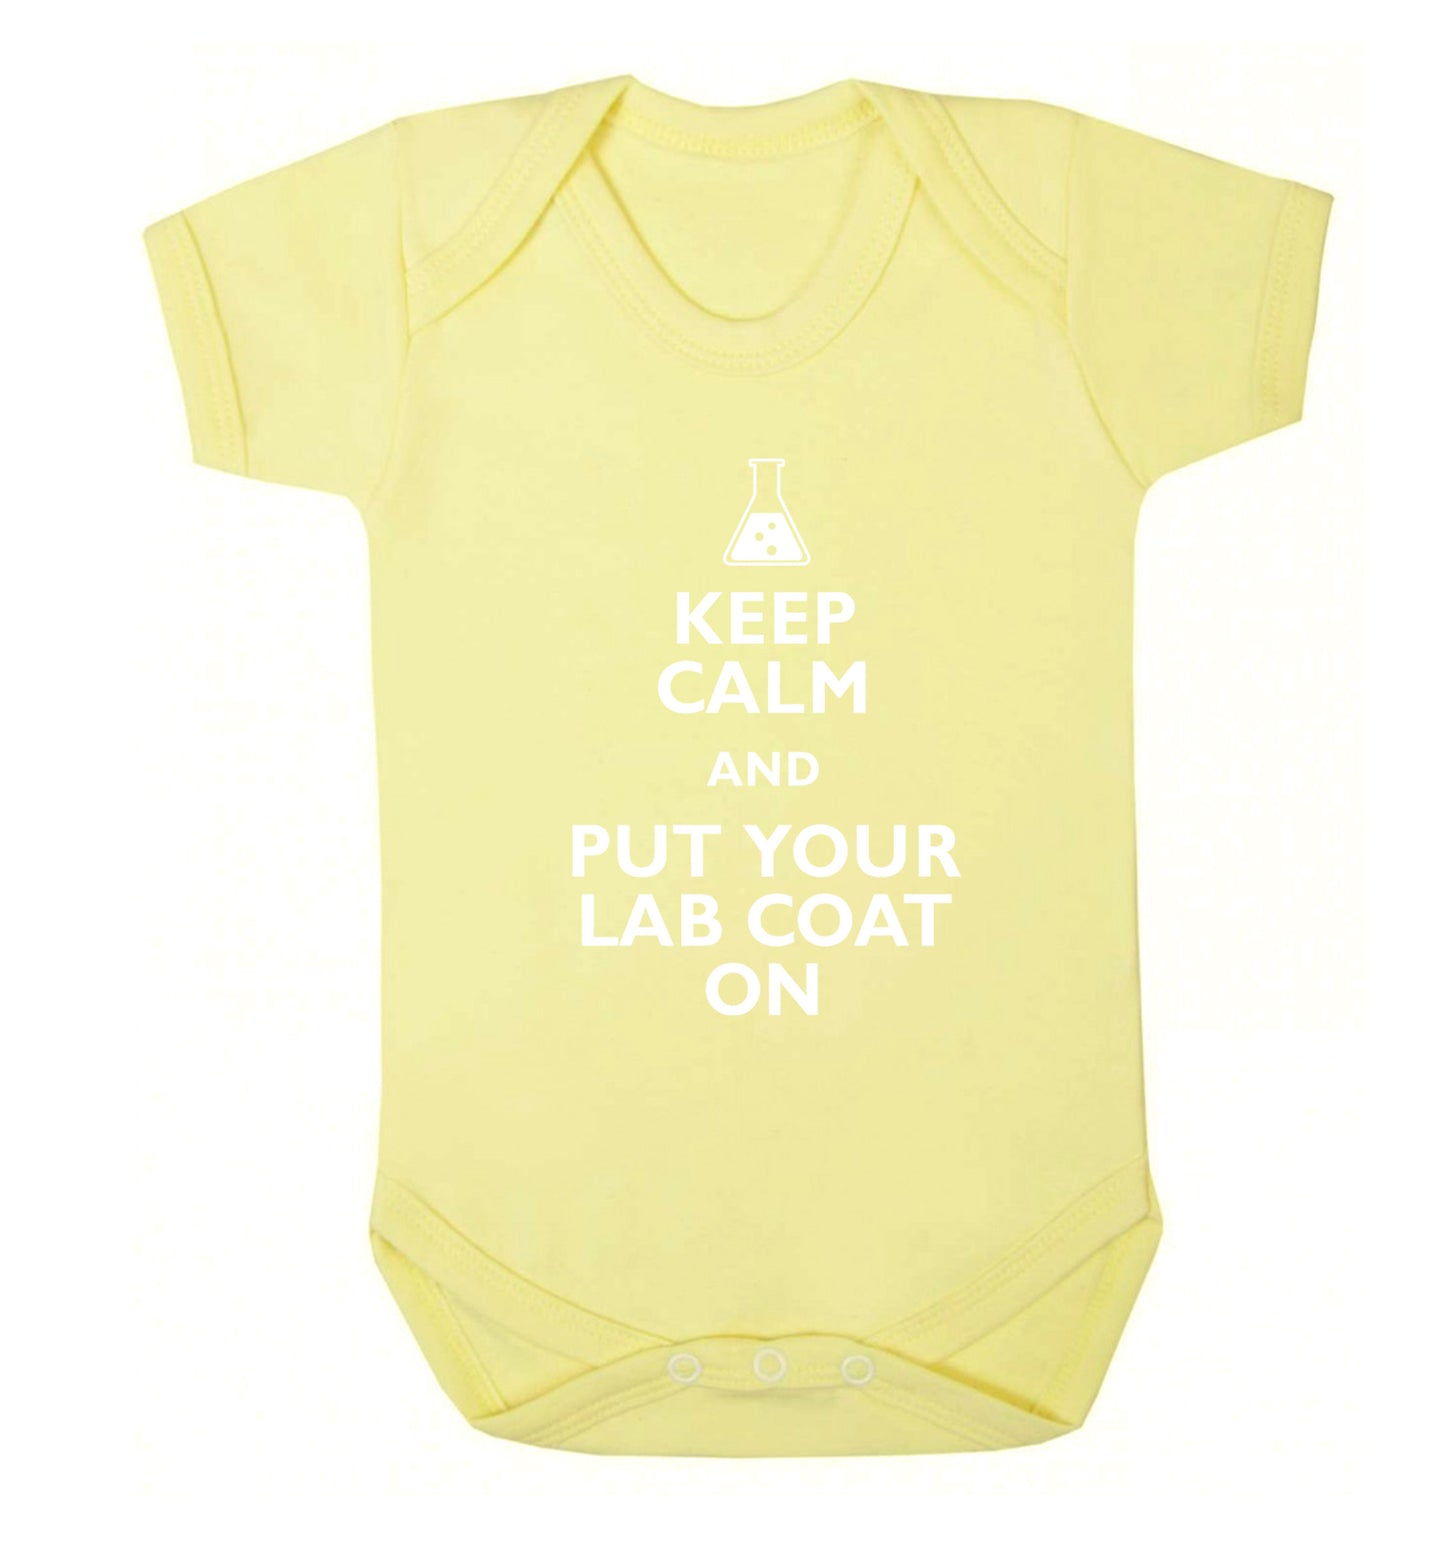 Keep calm and put your lab coat on Baby Vest pale yellow 18-24 months